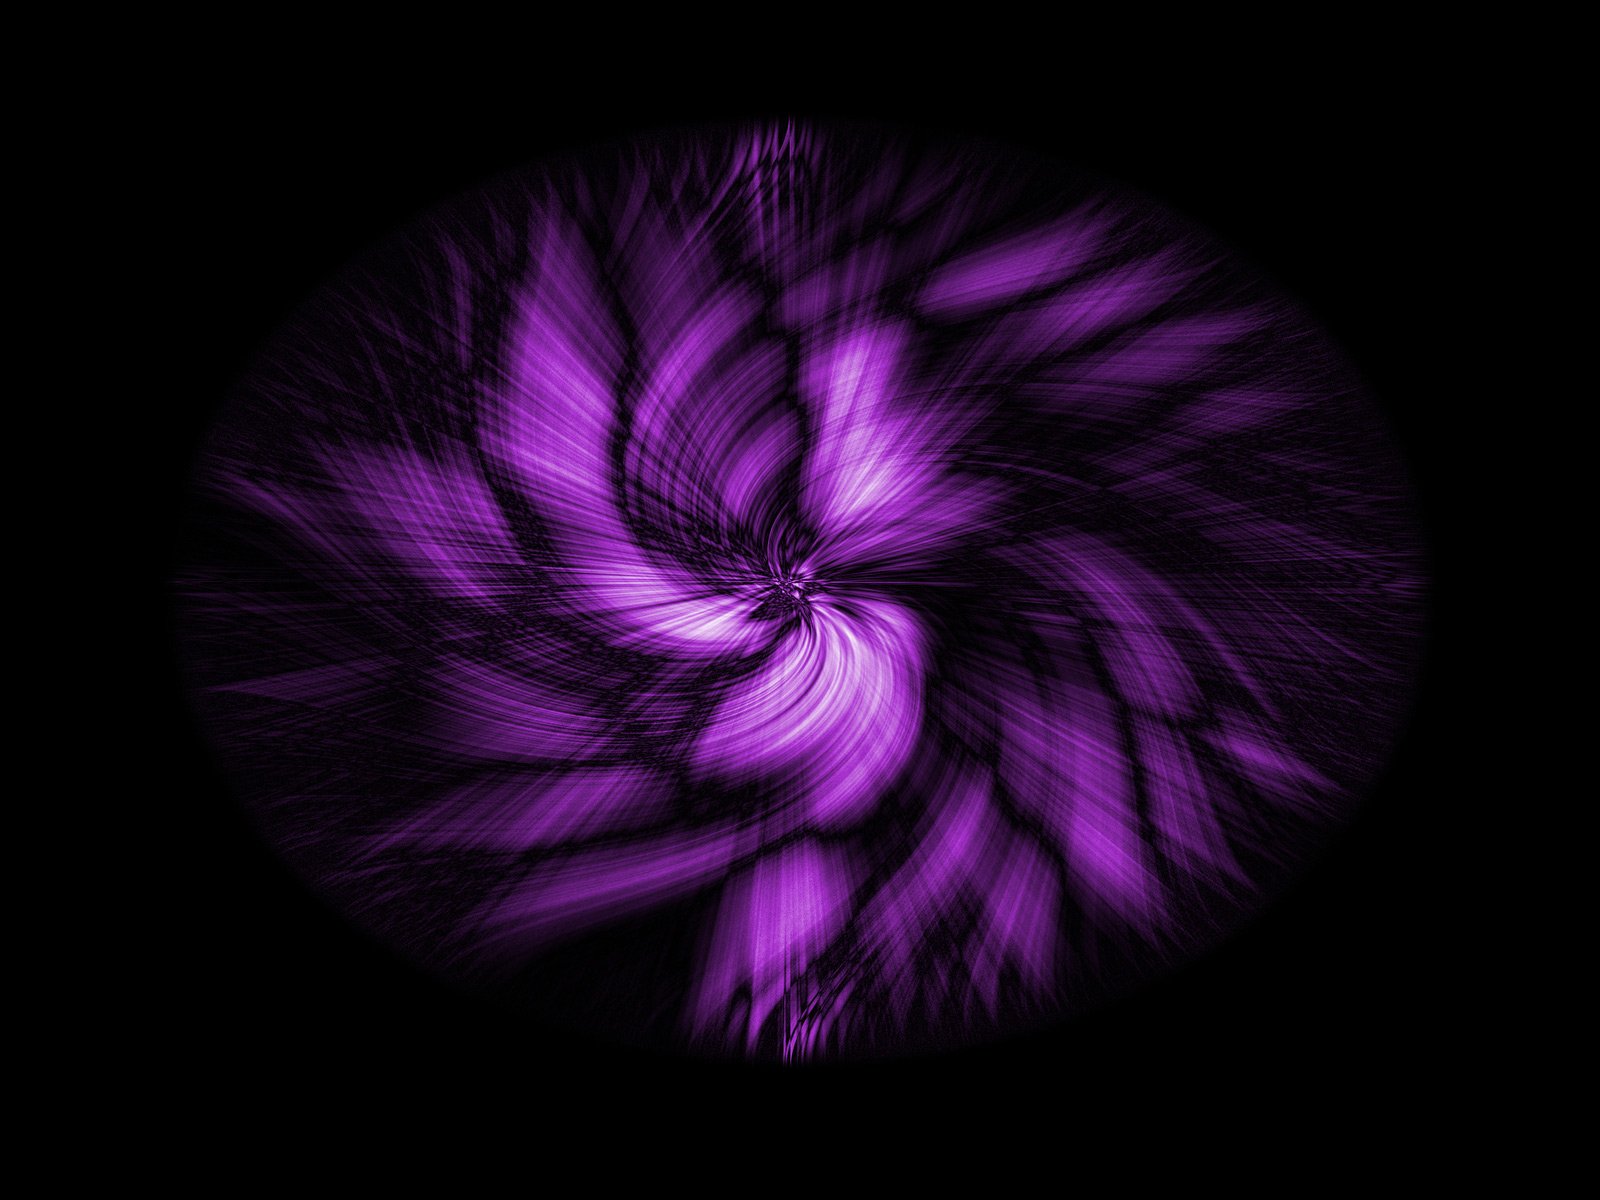 Purple Abstract Art Wallpaper 3543 Hd Wallpapers in Abstract